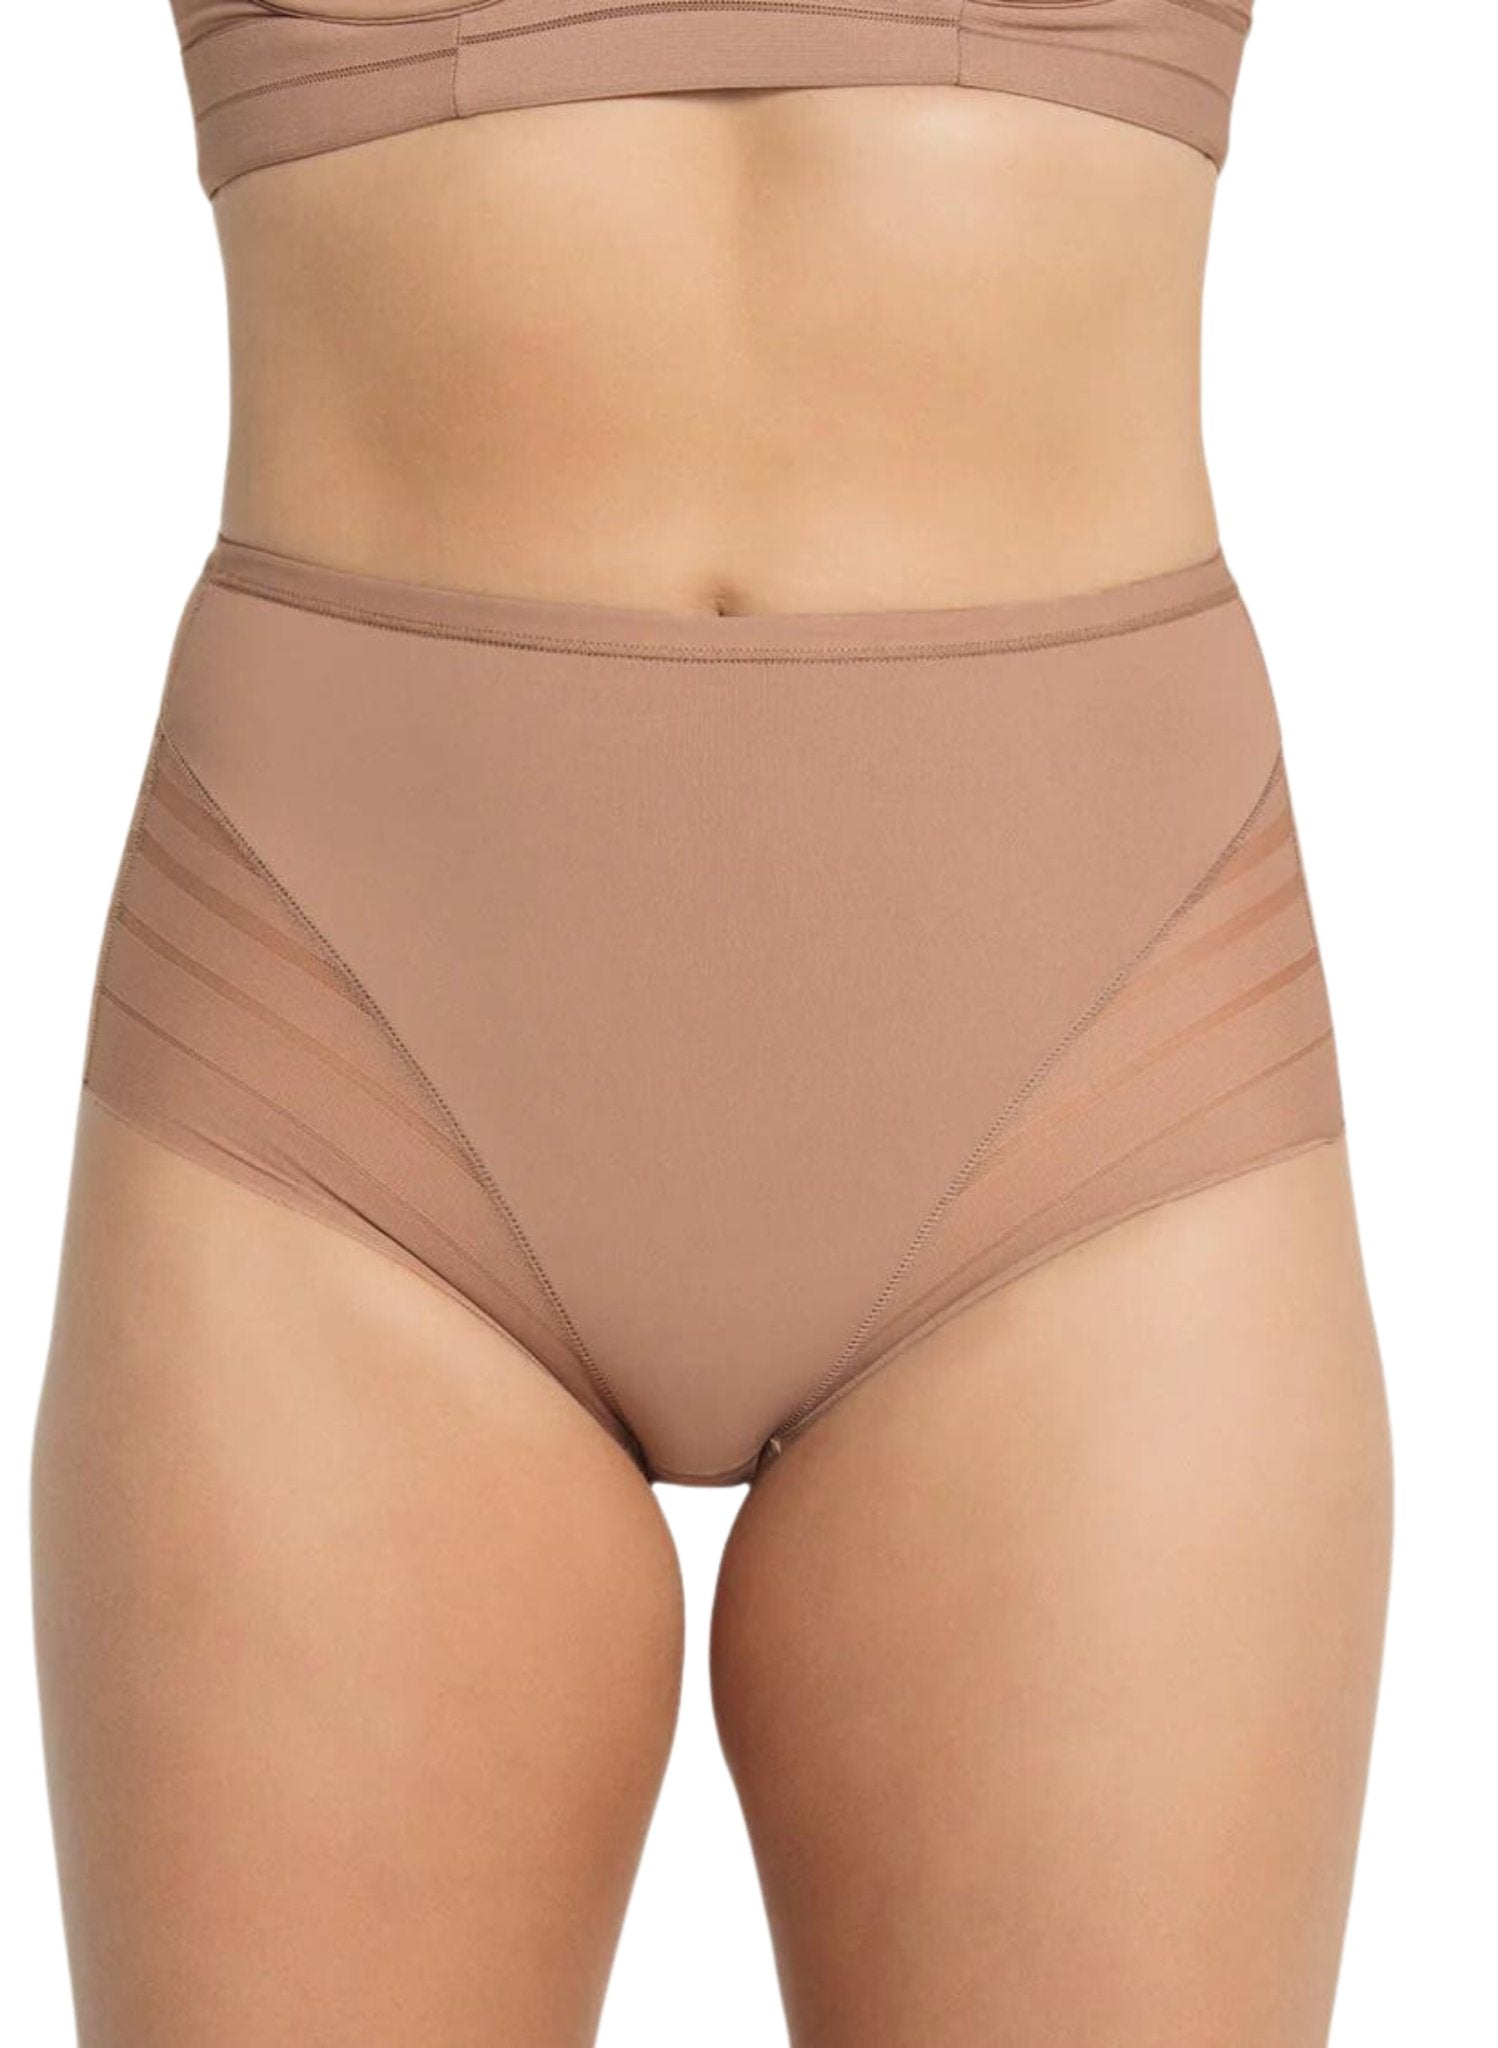 Lace Stripe Undetectable Classic Shaper Panty - Brown – Mums and Bumps